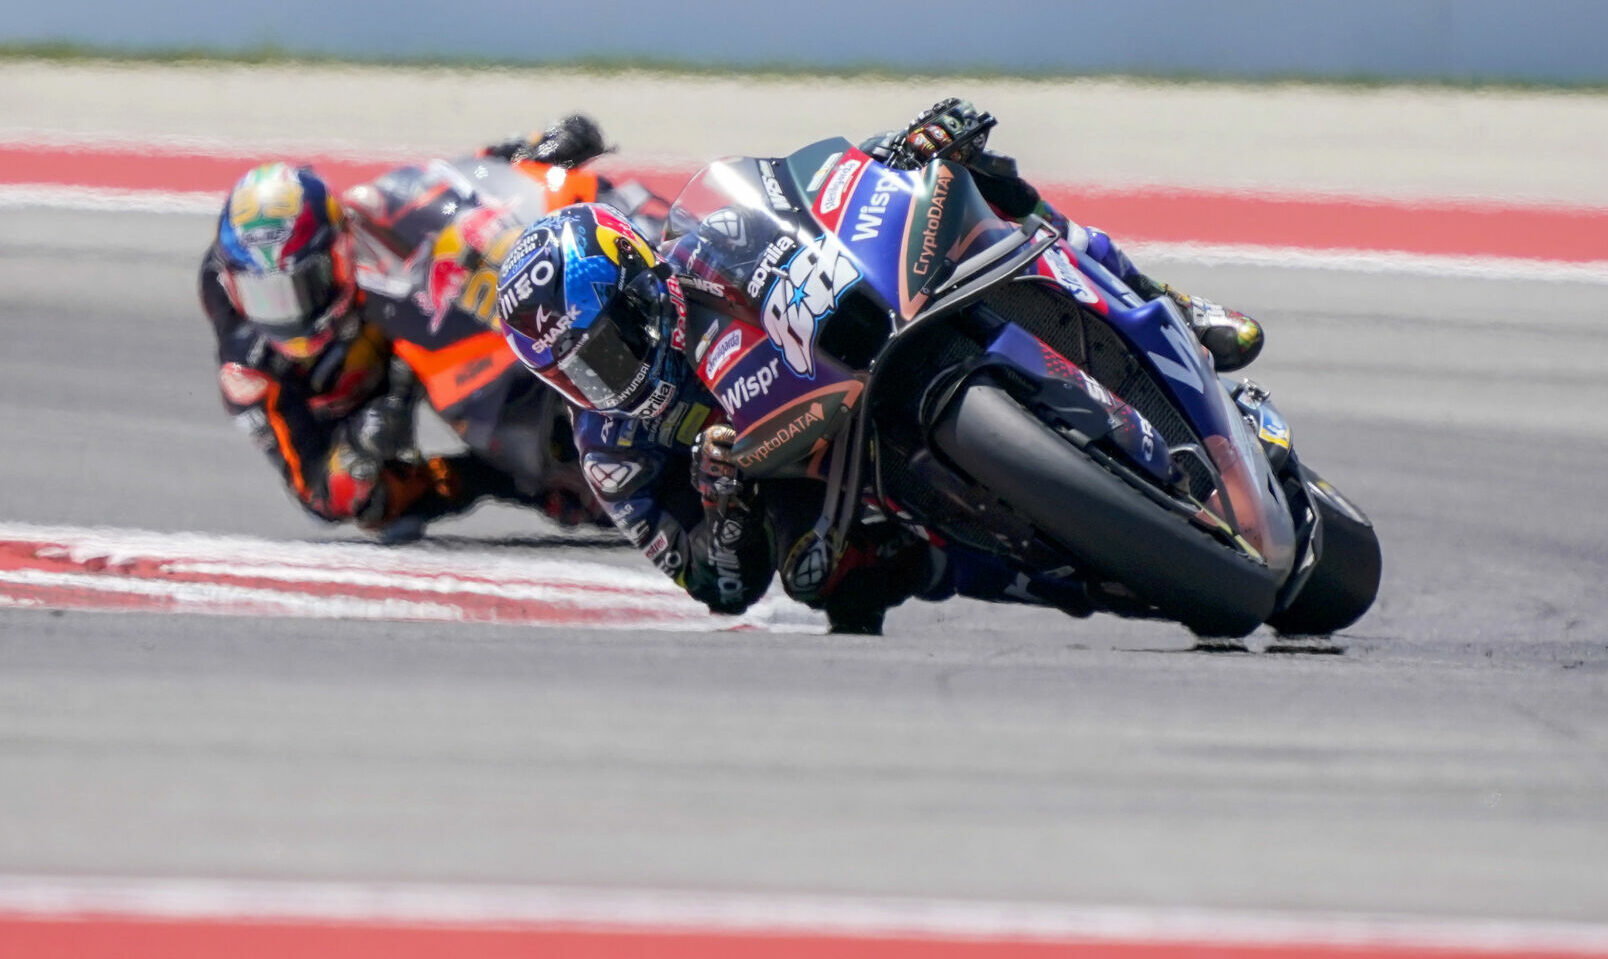 Miguel Oliveira's results at COTA resulted in him feeling confident and motivated heading into Round Four at Jerez. Photo courtesy RNF MotoGP Team.